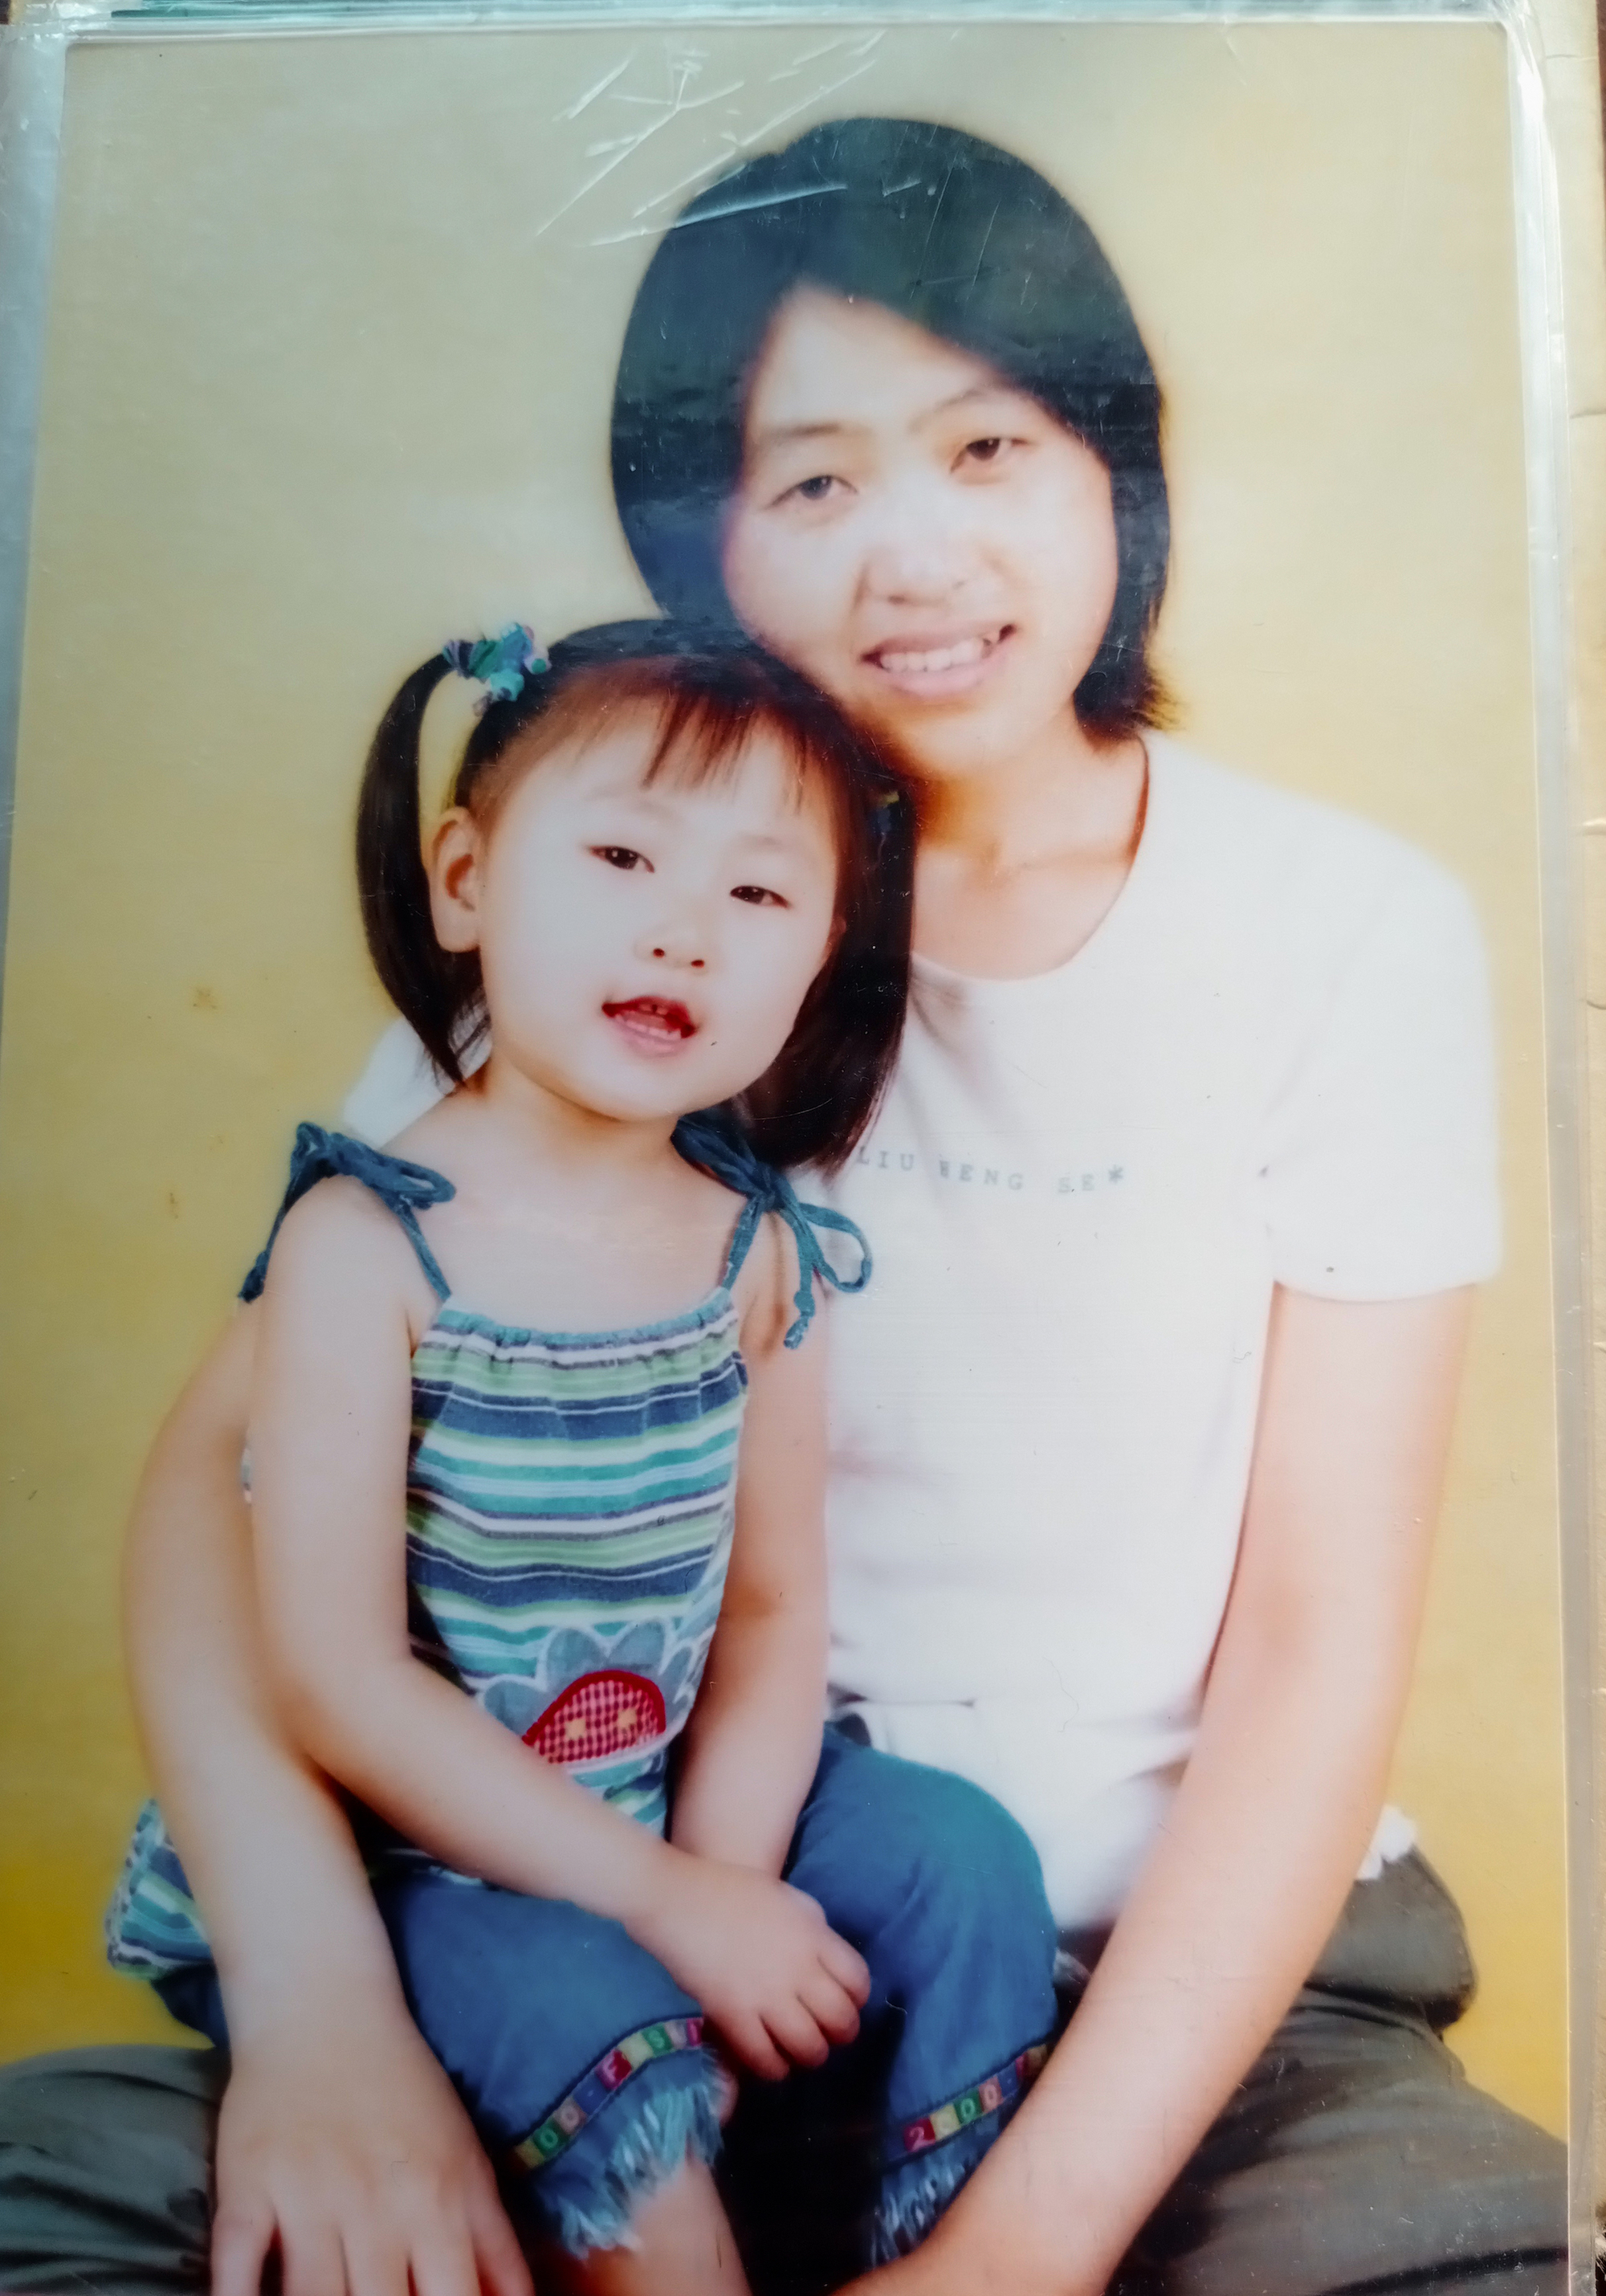 zhang minghui and her mother in 2000